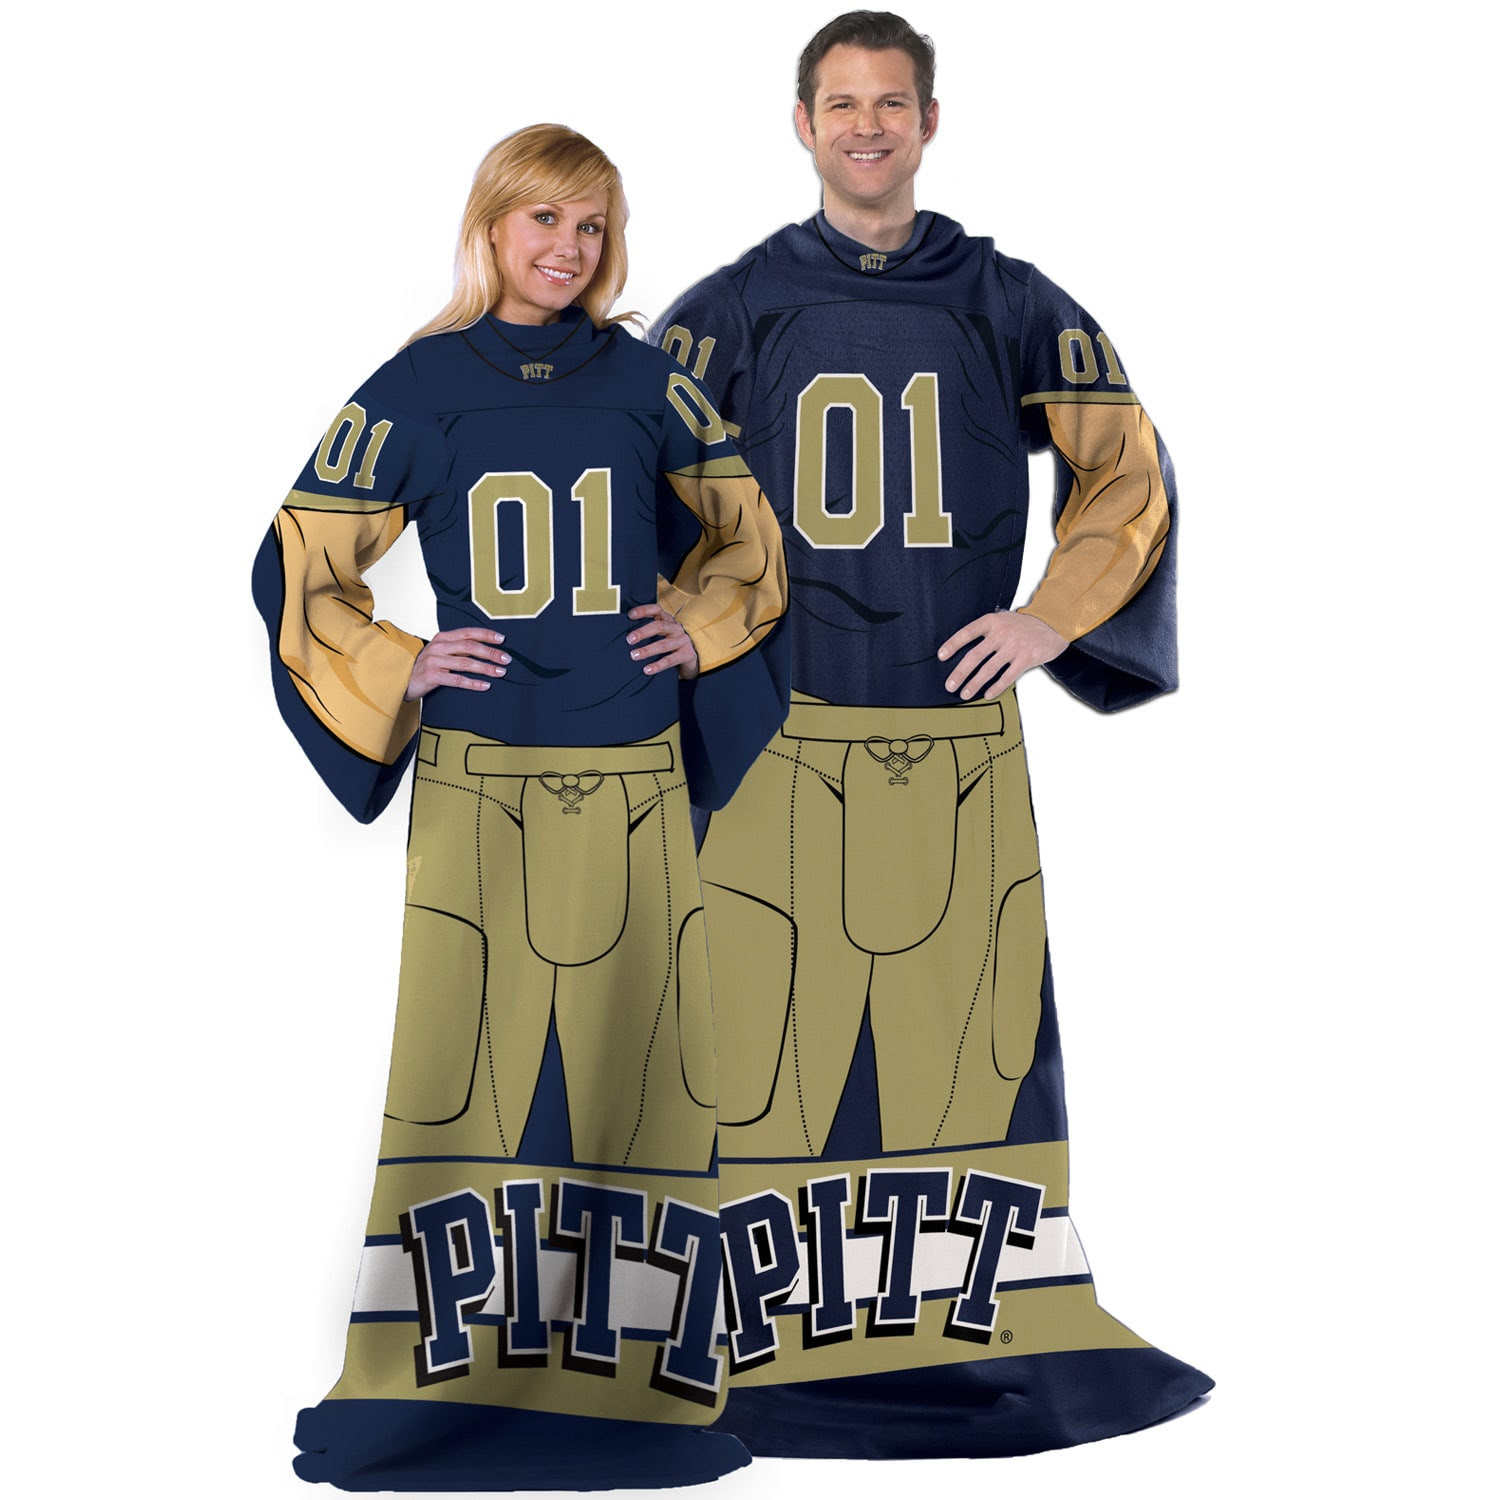 Pittsburgh Panthers Unisex Player Comfy Throw - Old Gold/Navy Blue